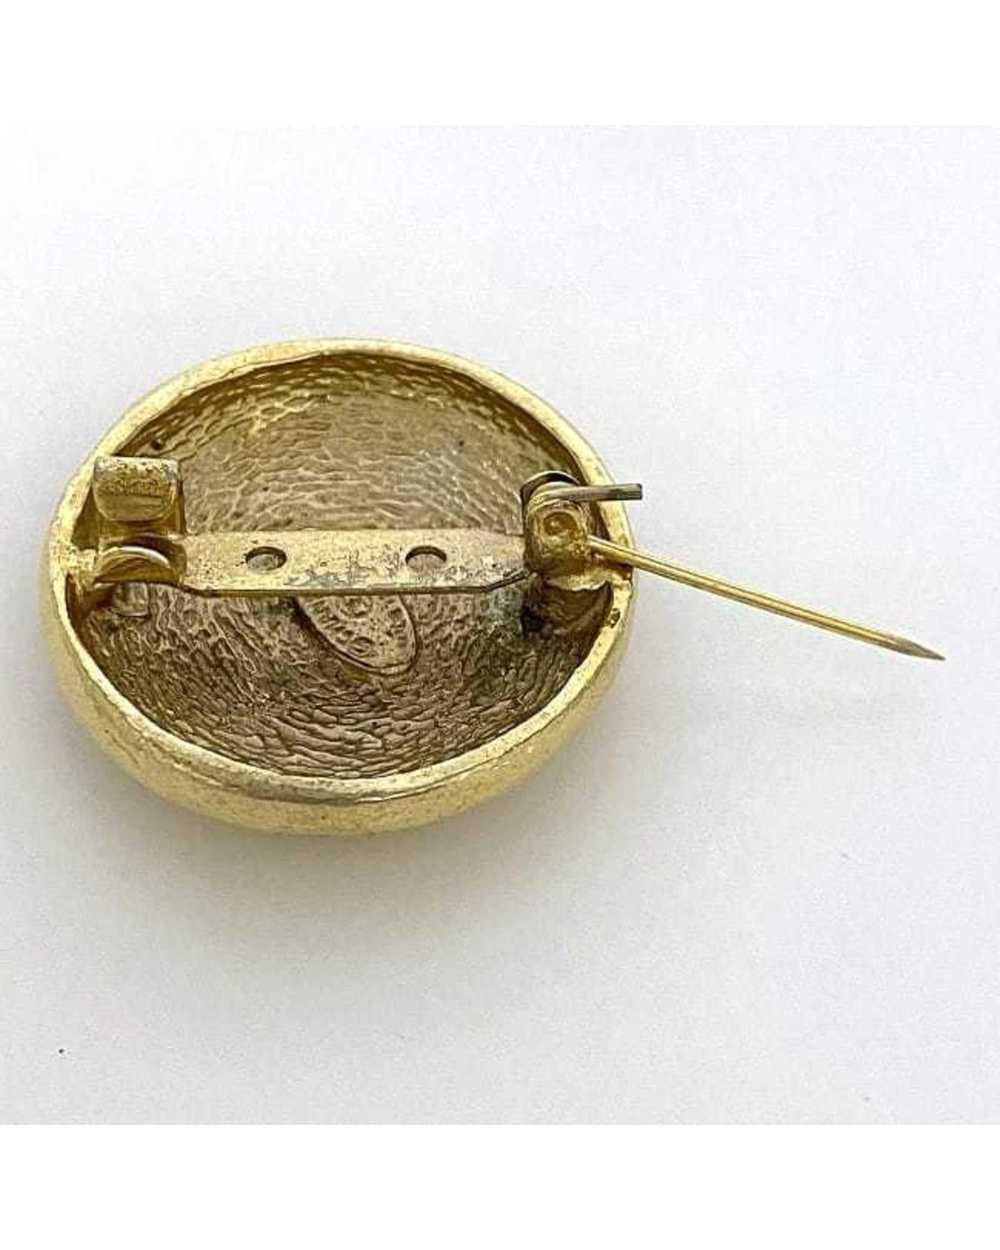 Chanel Luxurious Gold-Plated Coco Mark Pin Brooch - image 4